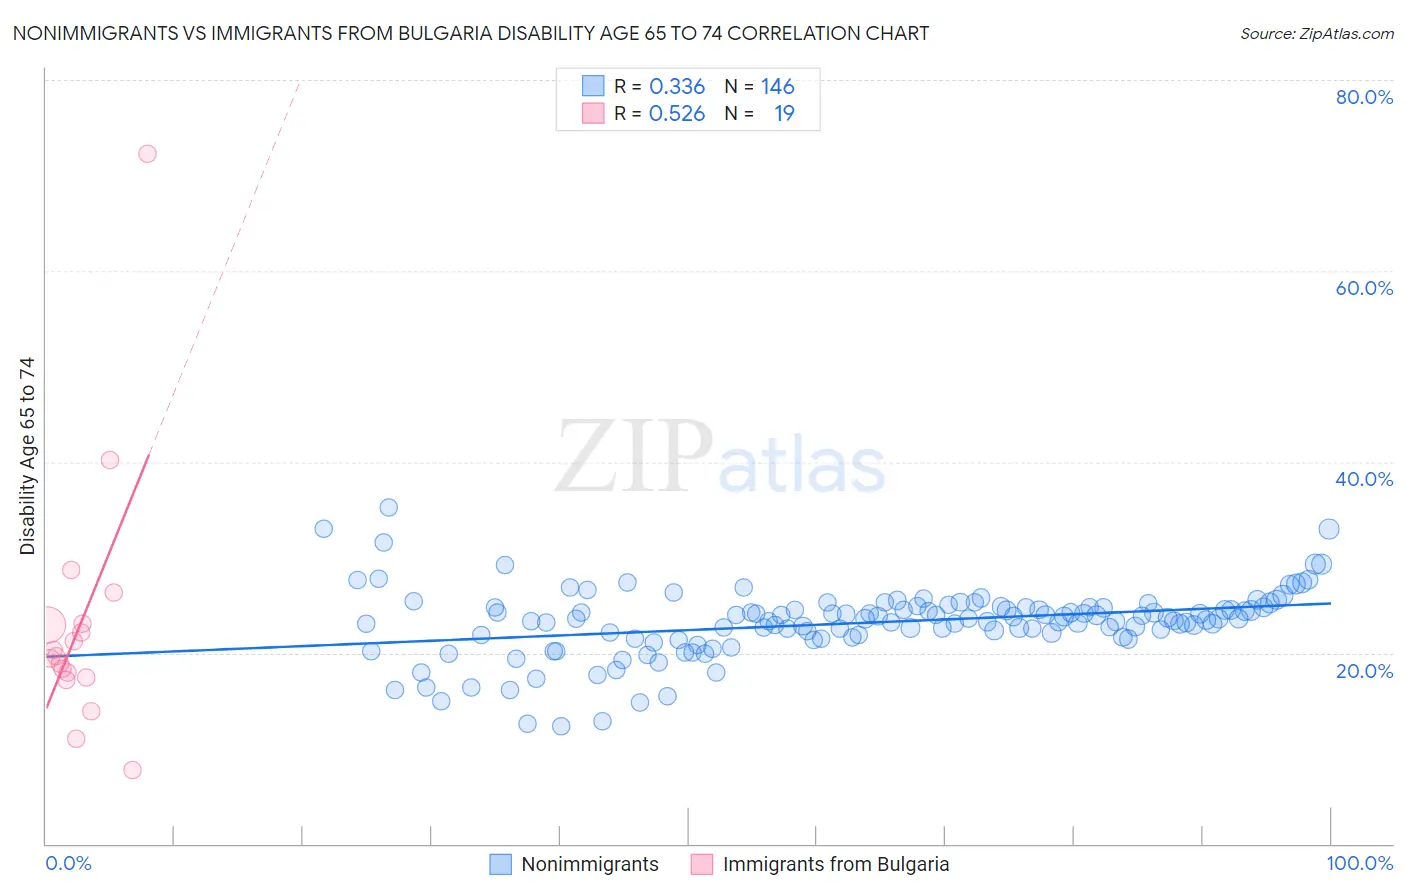 Nonimmigrants vs Immigrants from Bulgaria Disability Age 65 to 74